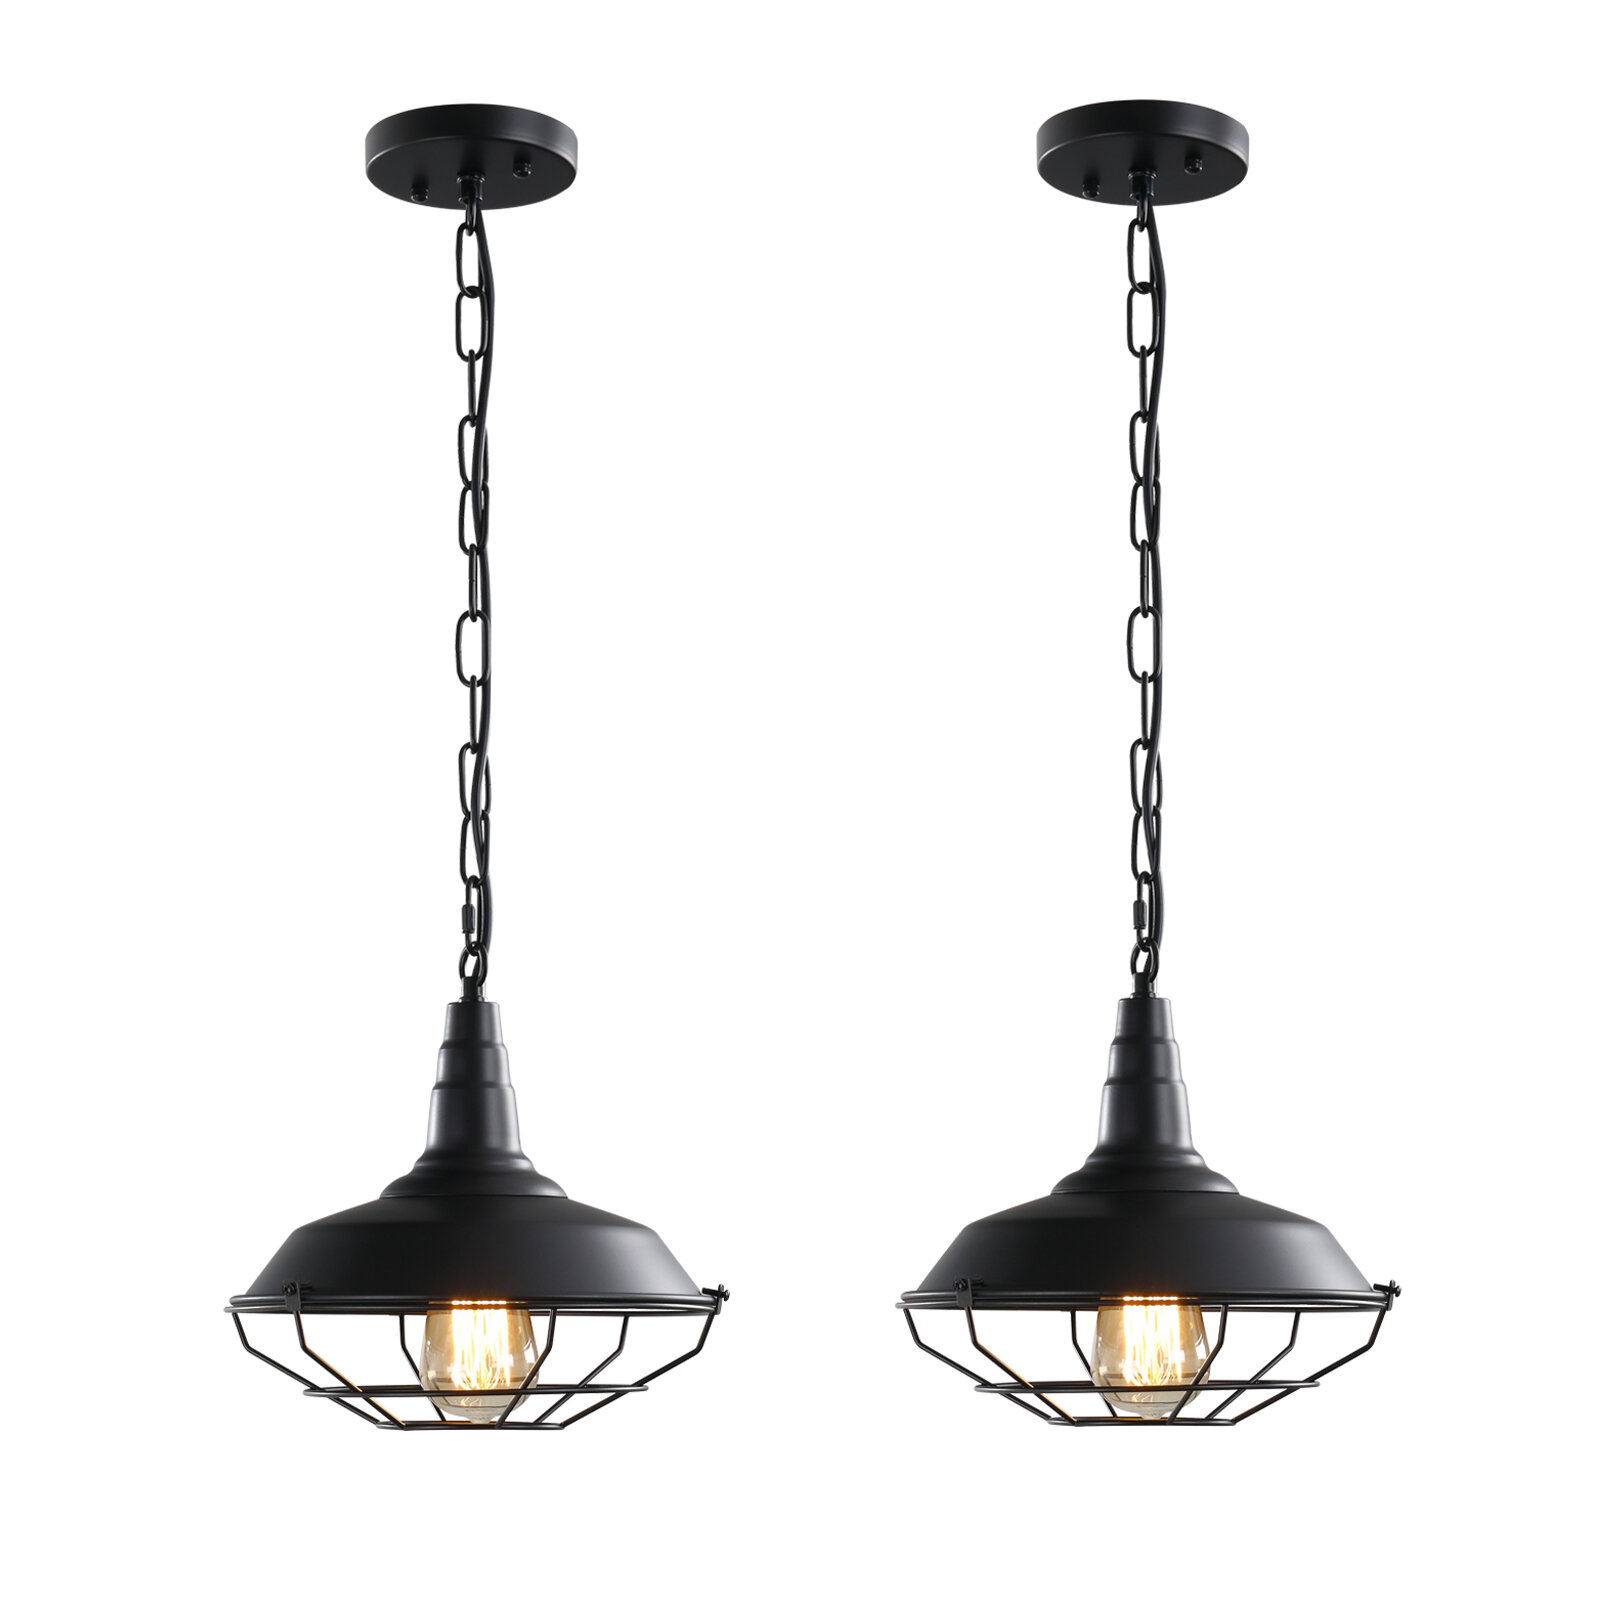 Set of 2 Industrial Vintage Style Top Black Light Cage for Pendant Light Lamps 